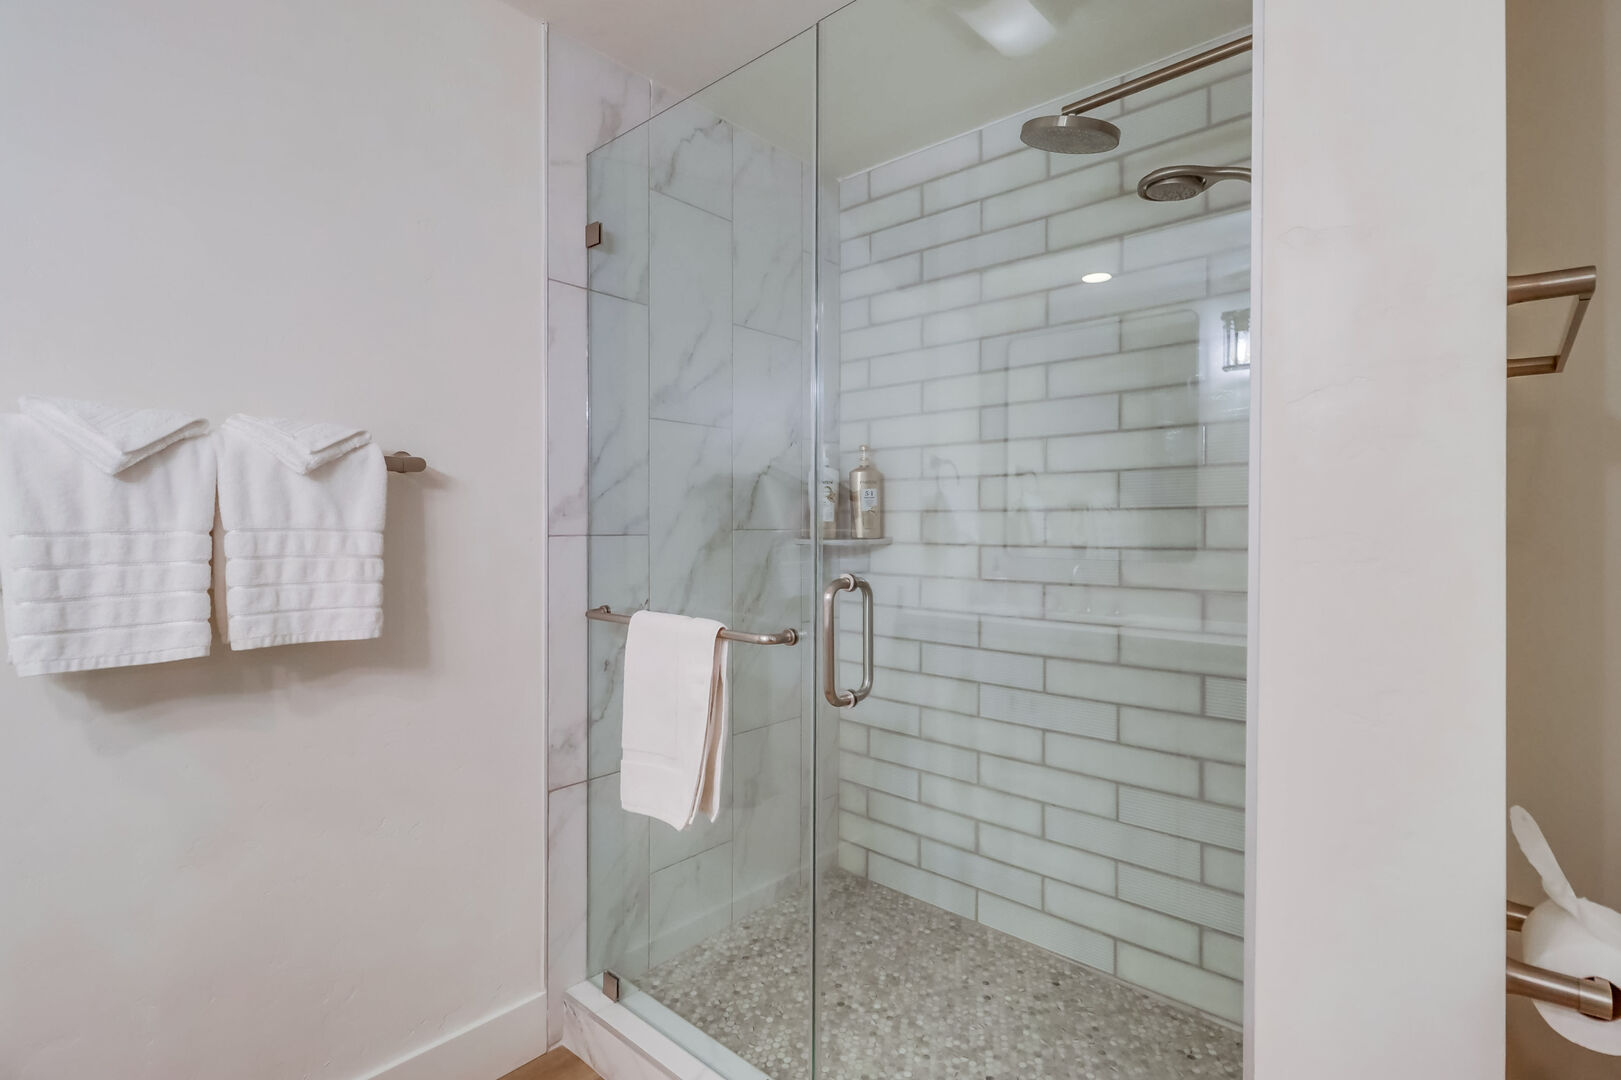 Gorgeous remodeled master bathroom with dual vanity, lighting, and walk-in shower